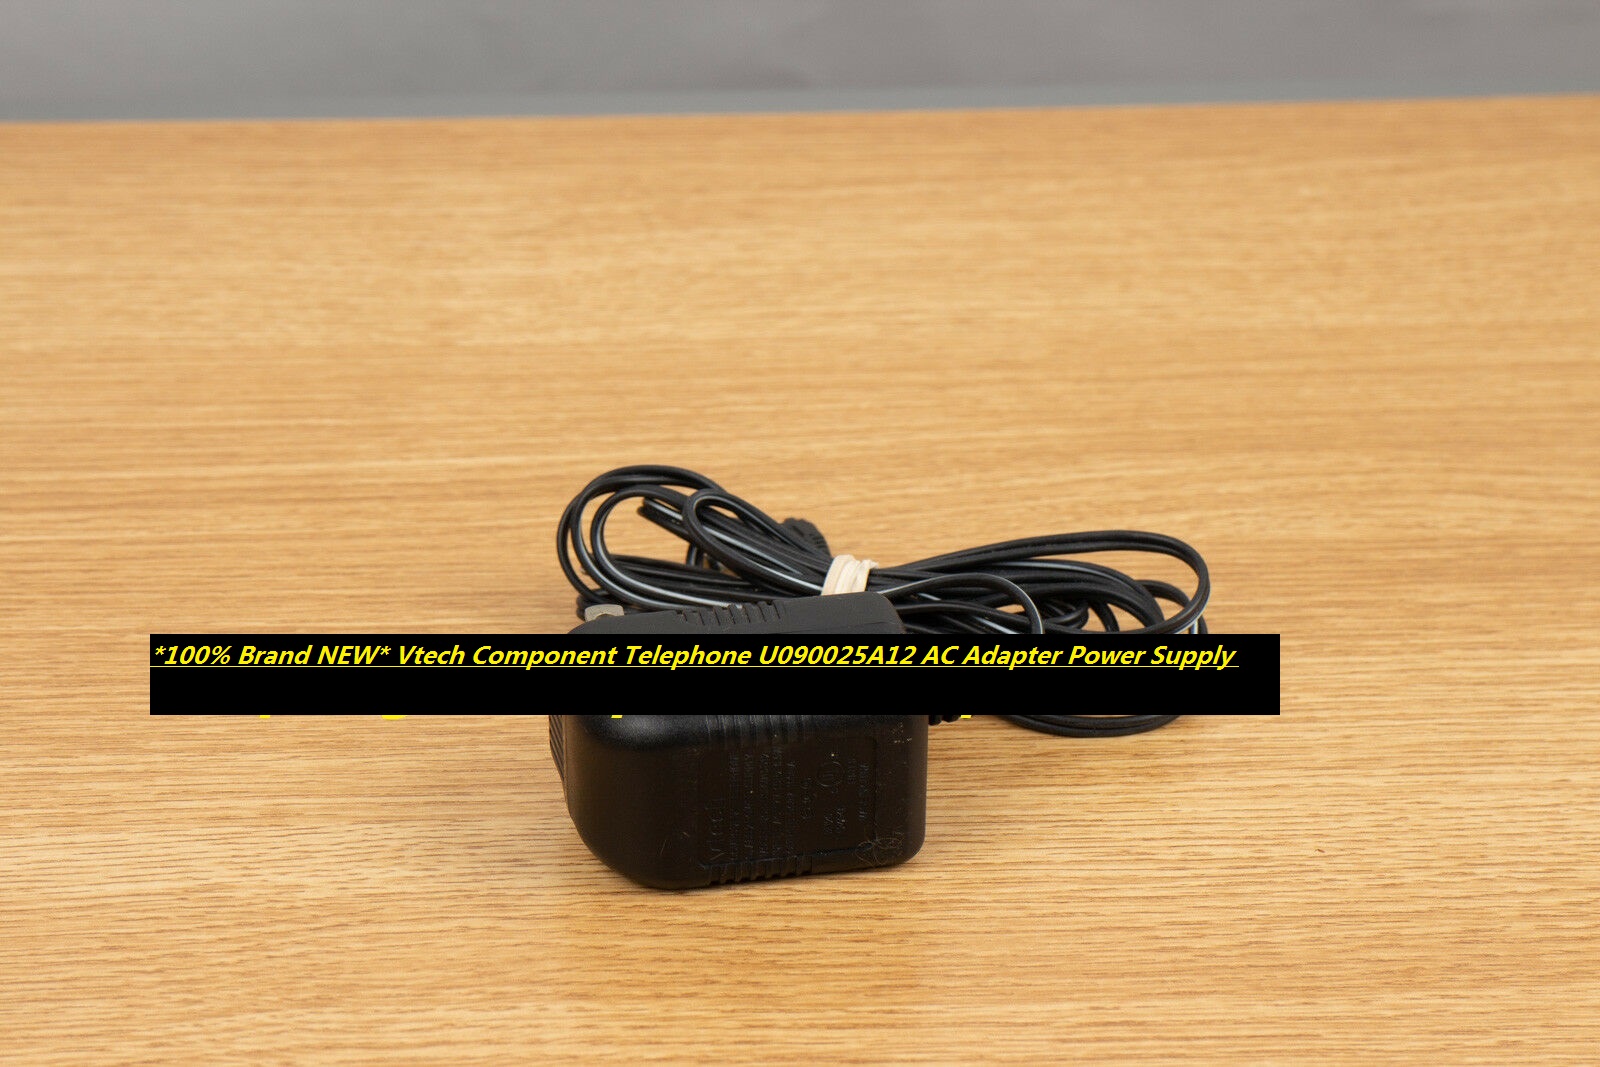 *100% Brand NEW* Vtech Component Telephone U090025A12 AC Adapter Power Supply - Click Image to Close